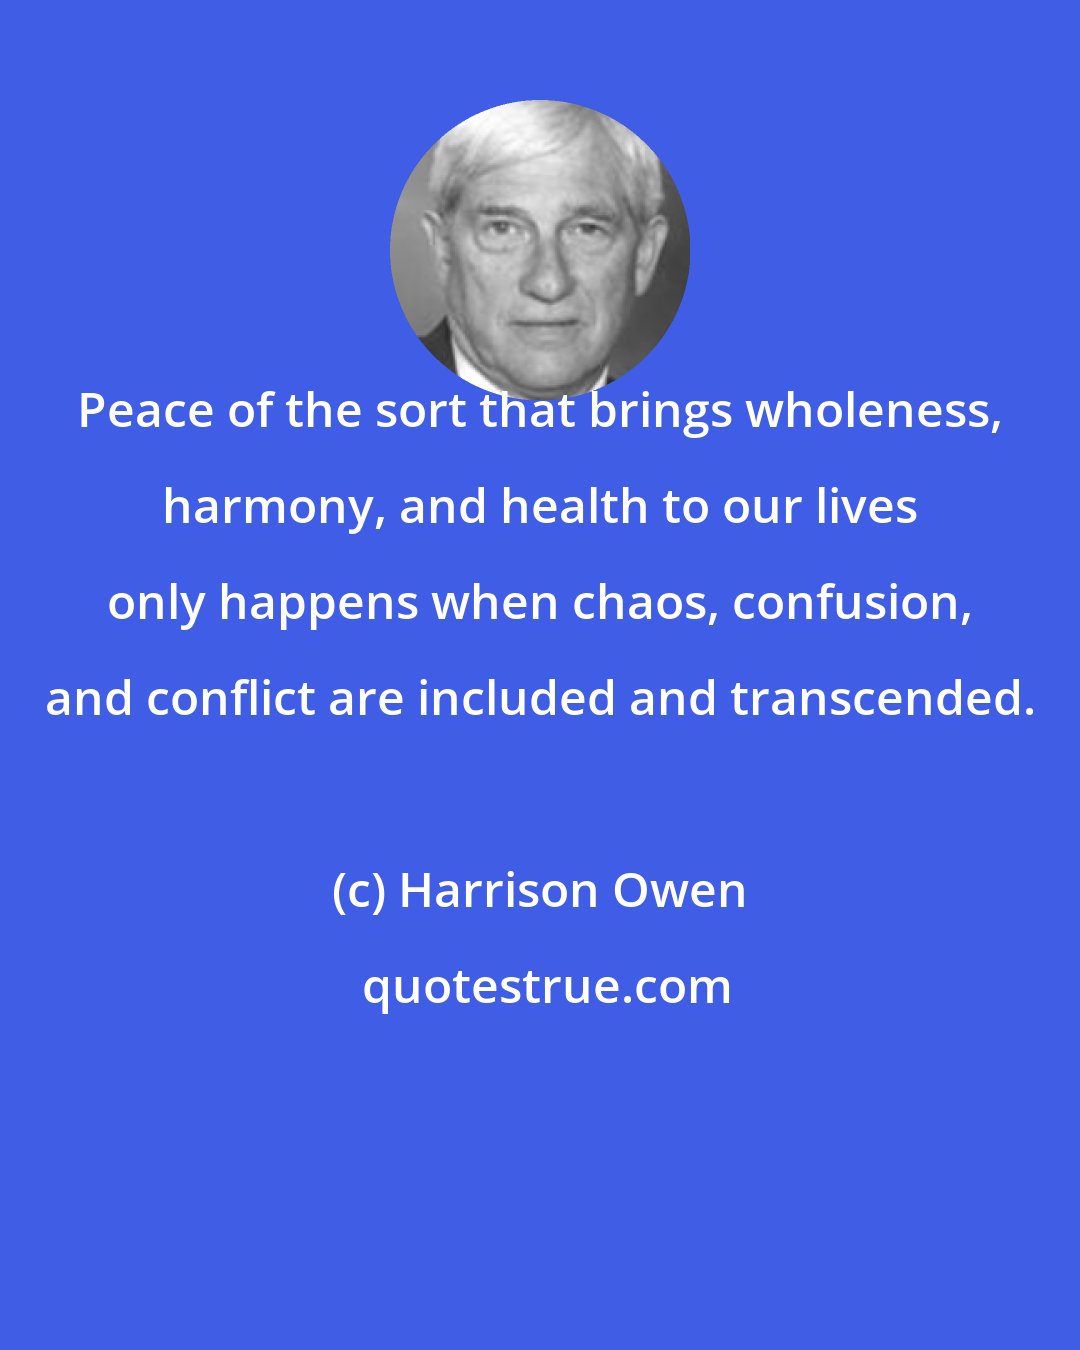 Harrison Owen: Peace of the sort that brings wholeness, harmony, and health to our lives only happens when chaos, confusion, and conflict are included and transcended.